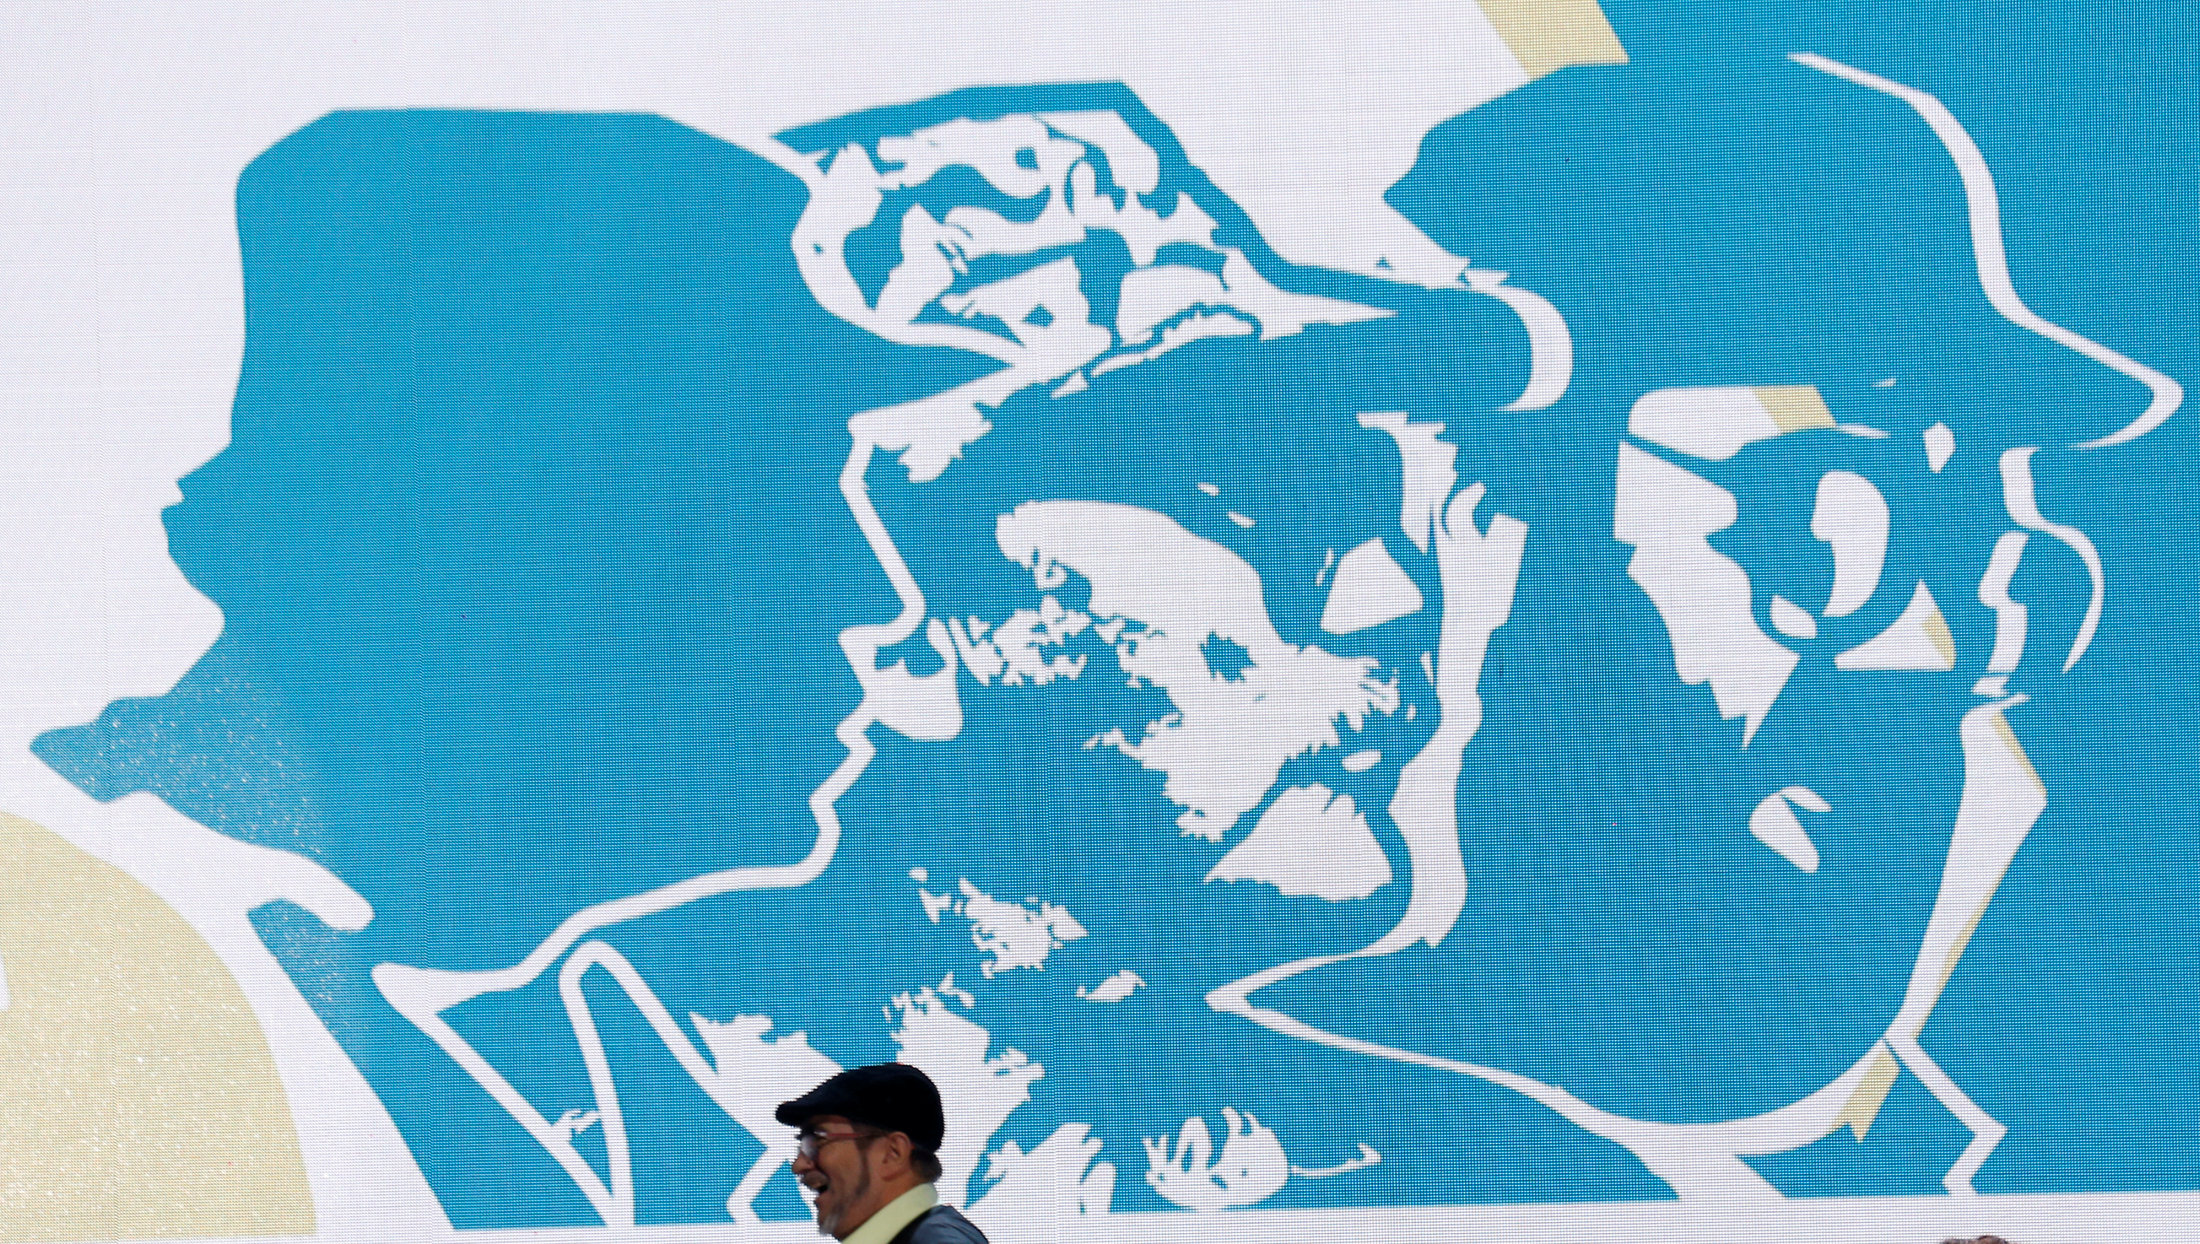 Colombia's FARC rebels debut political party